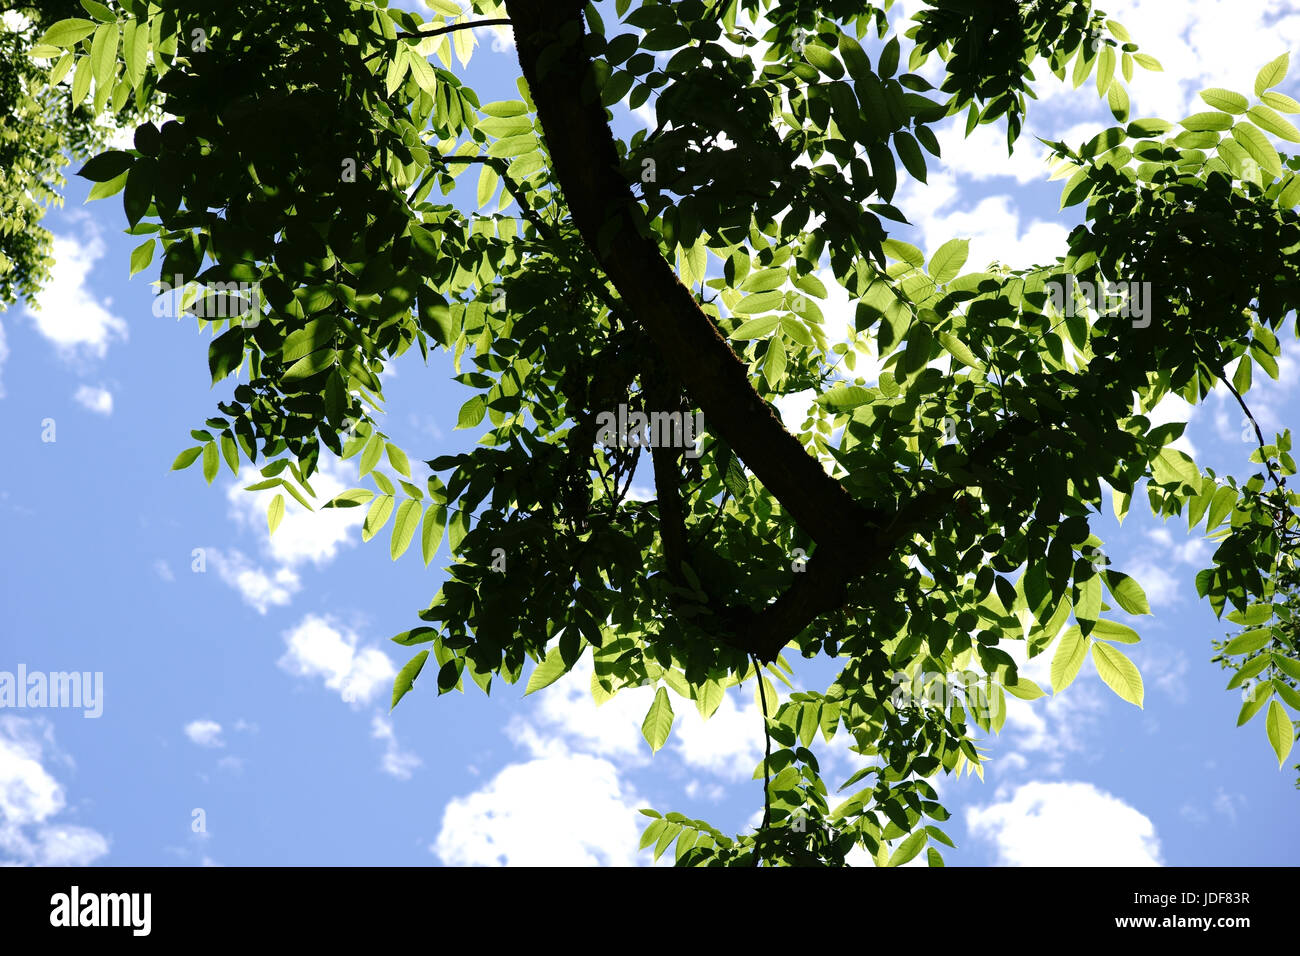 The canopy and the treetop of a nut tree, Juglans cinerea against clouds on the blue sky. Stock Photo